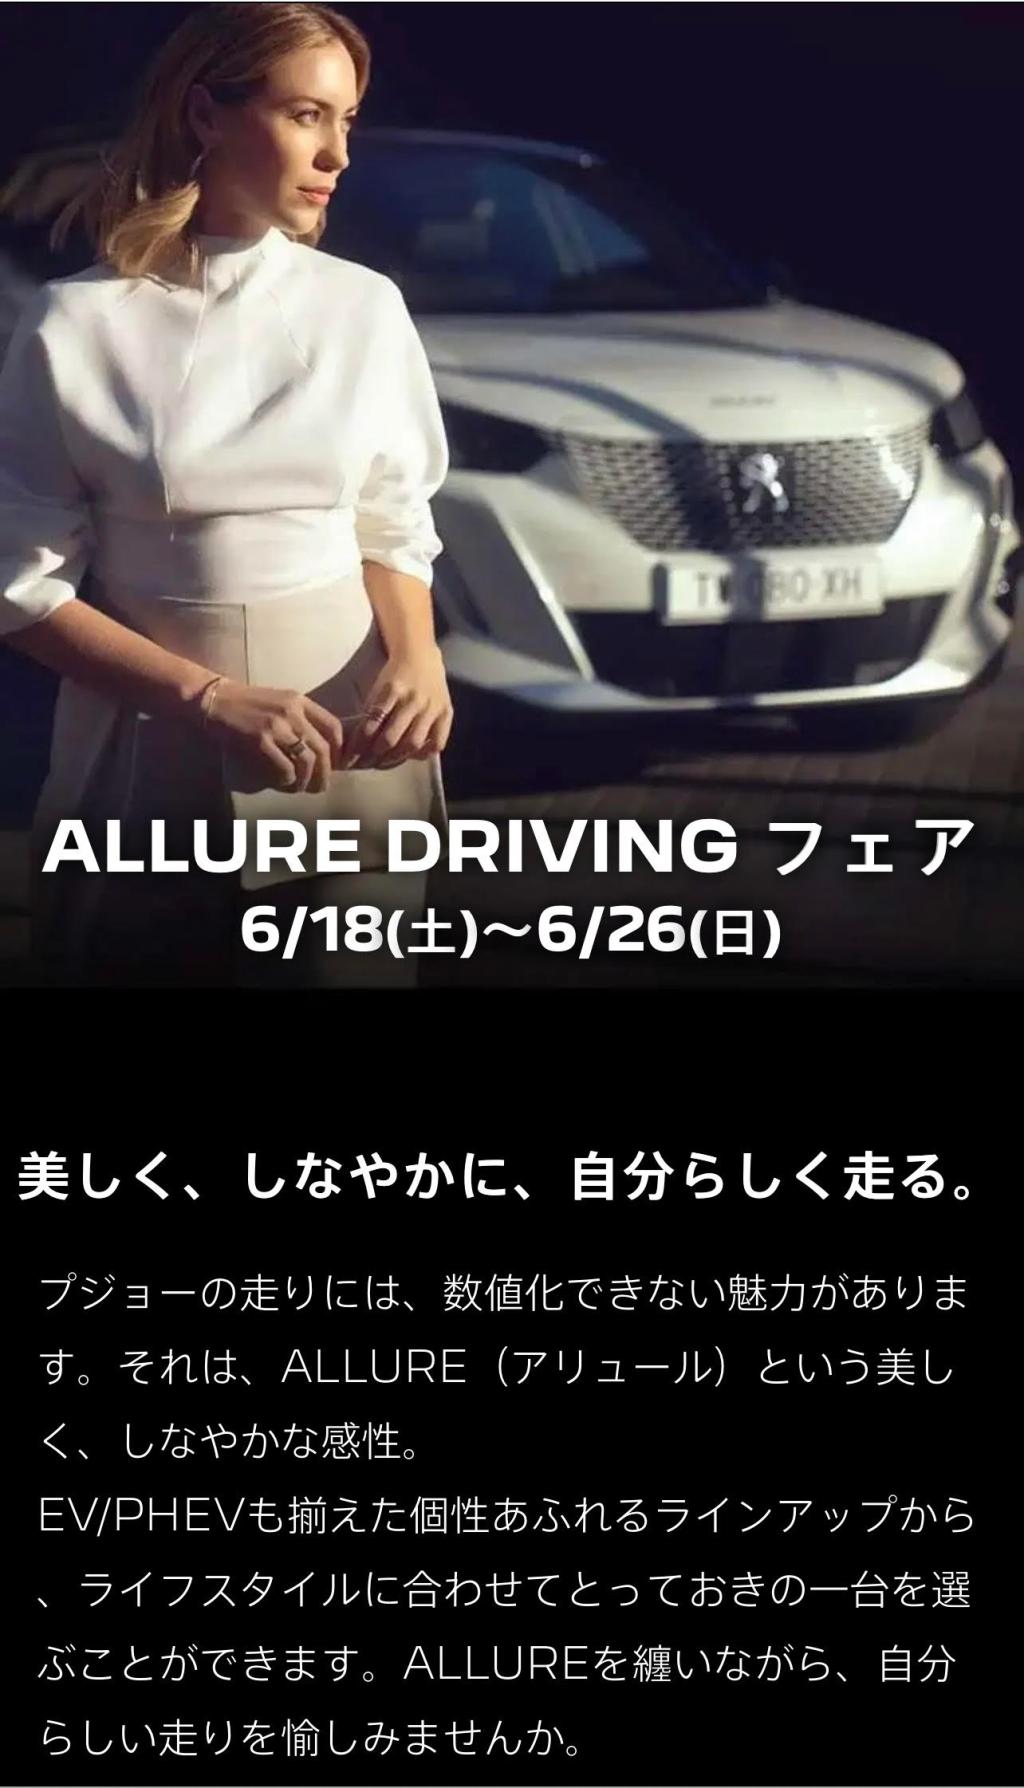 ALLURE DRIVINGフェア！！